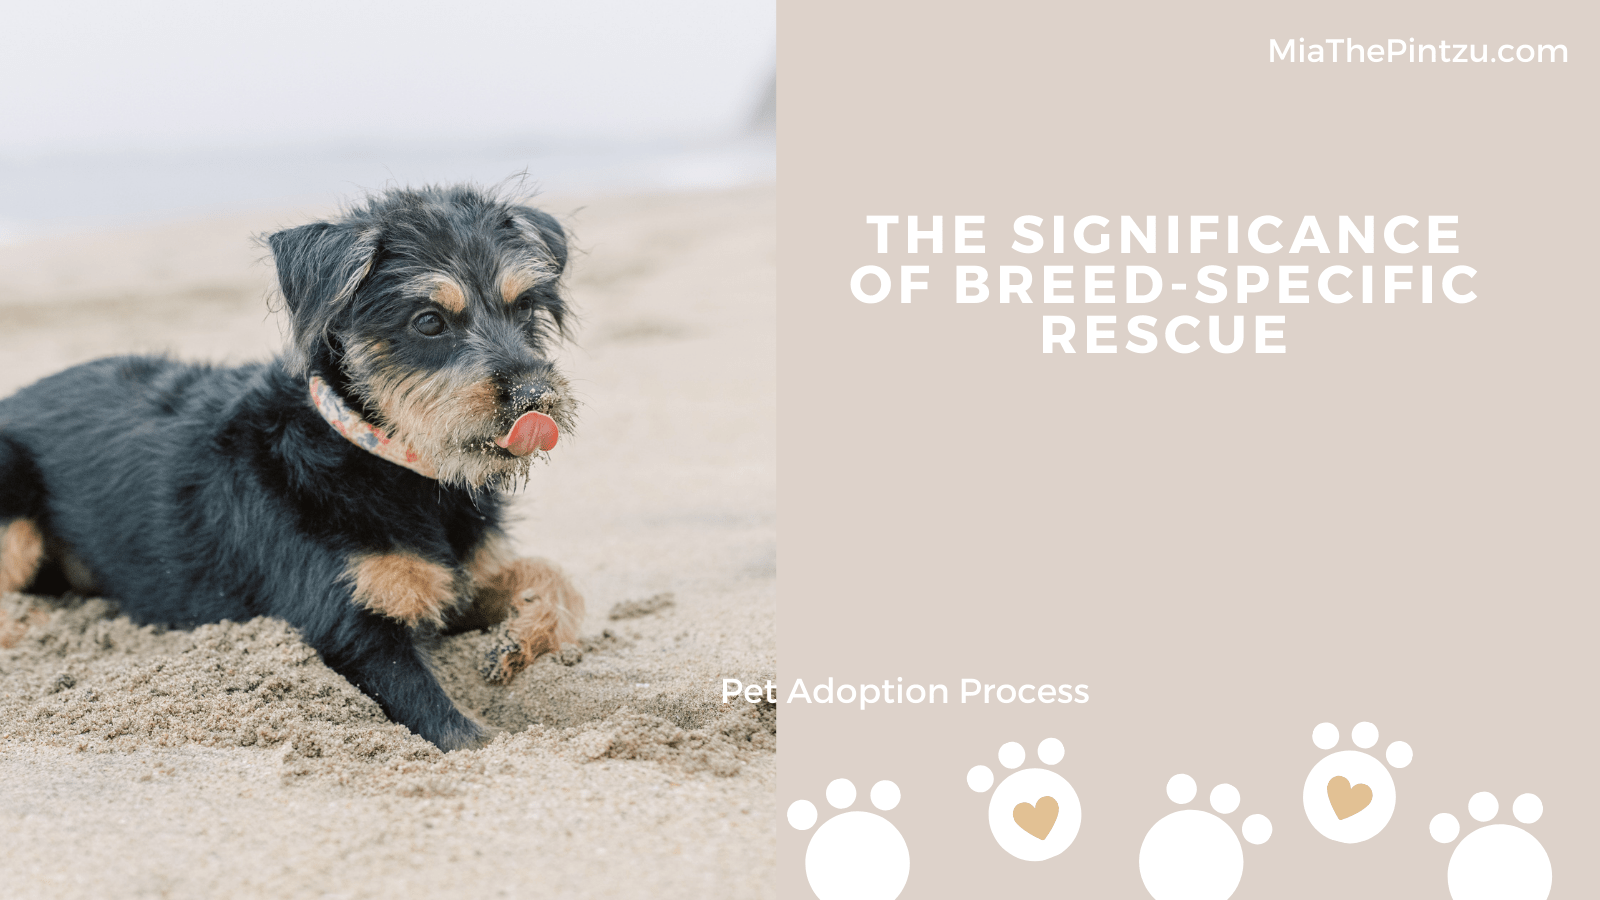 The Significance of Breed-Specific Rescue